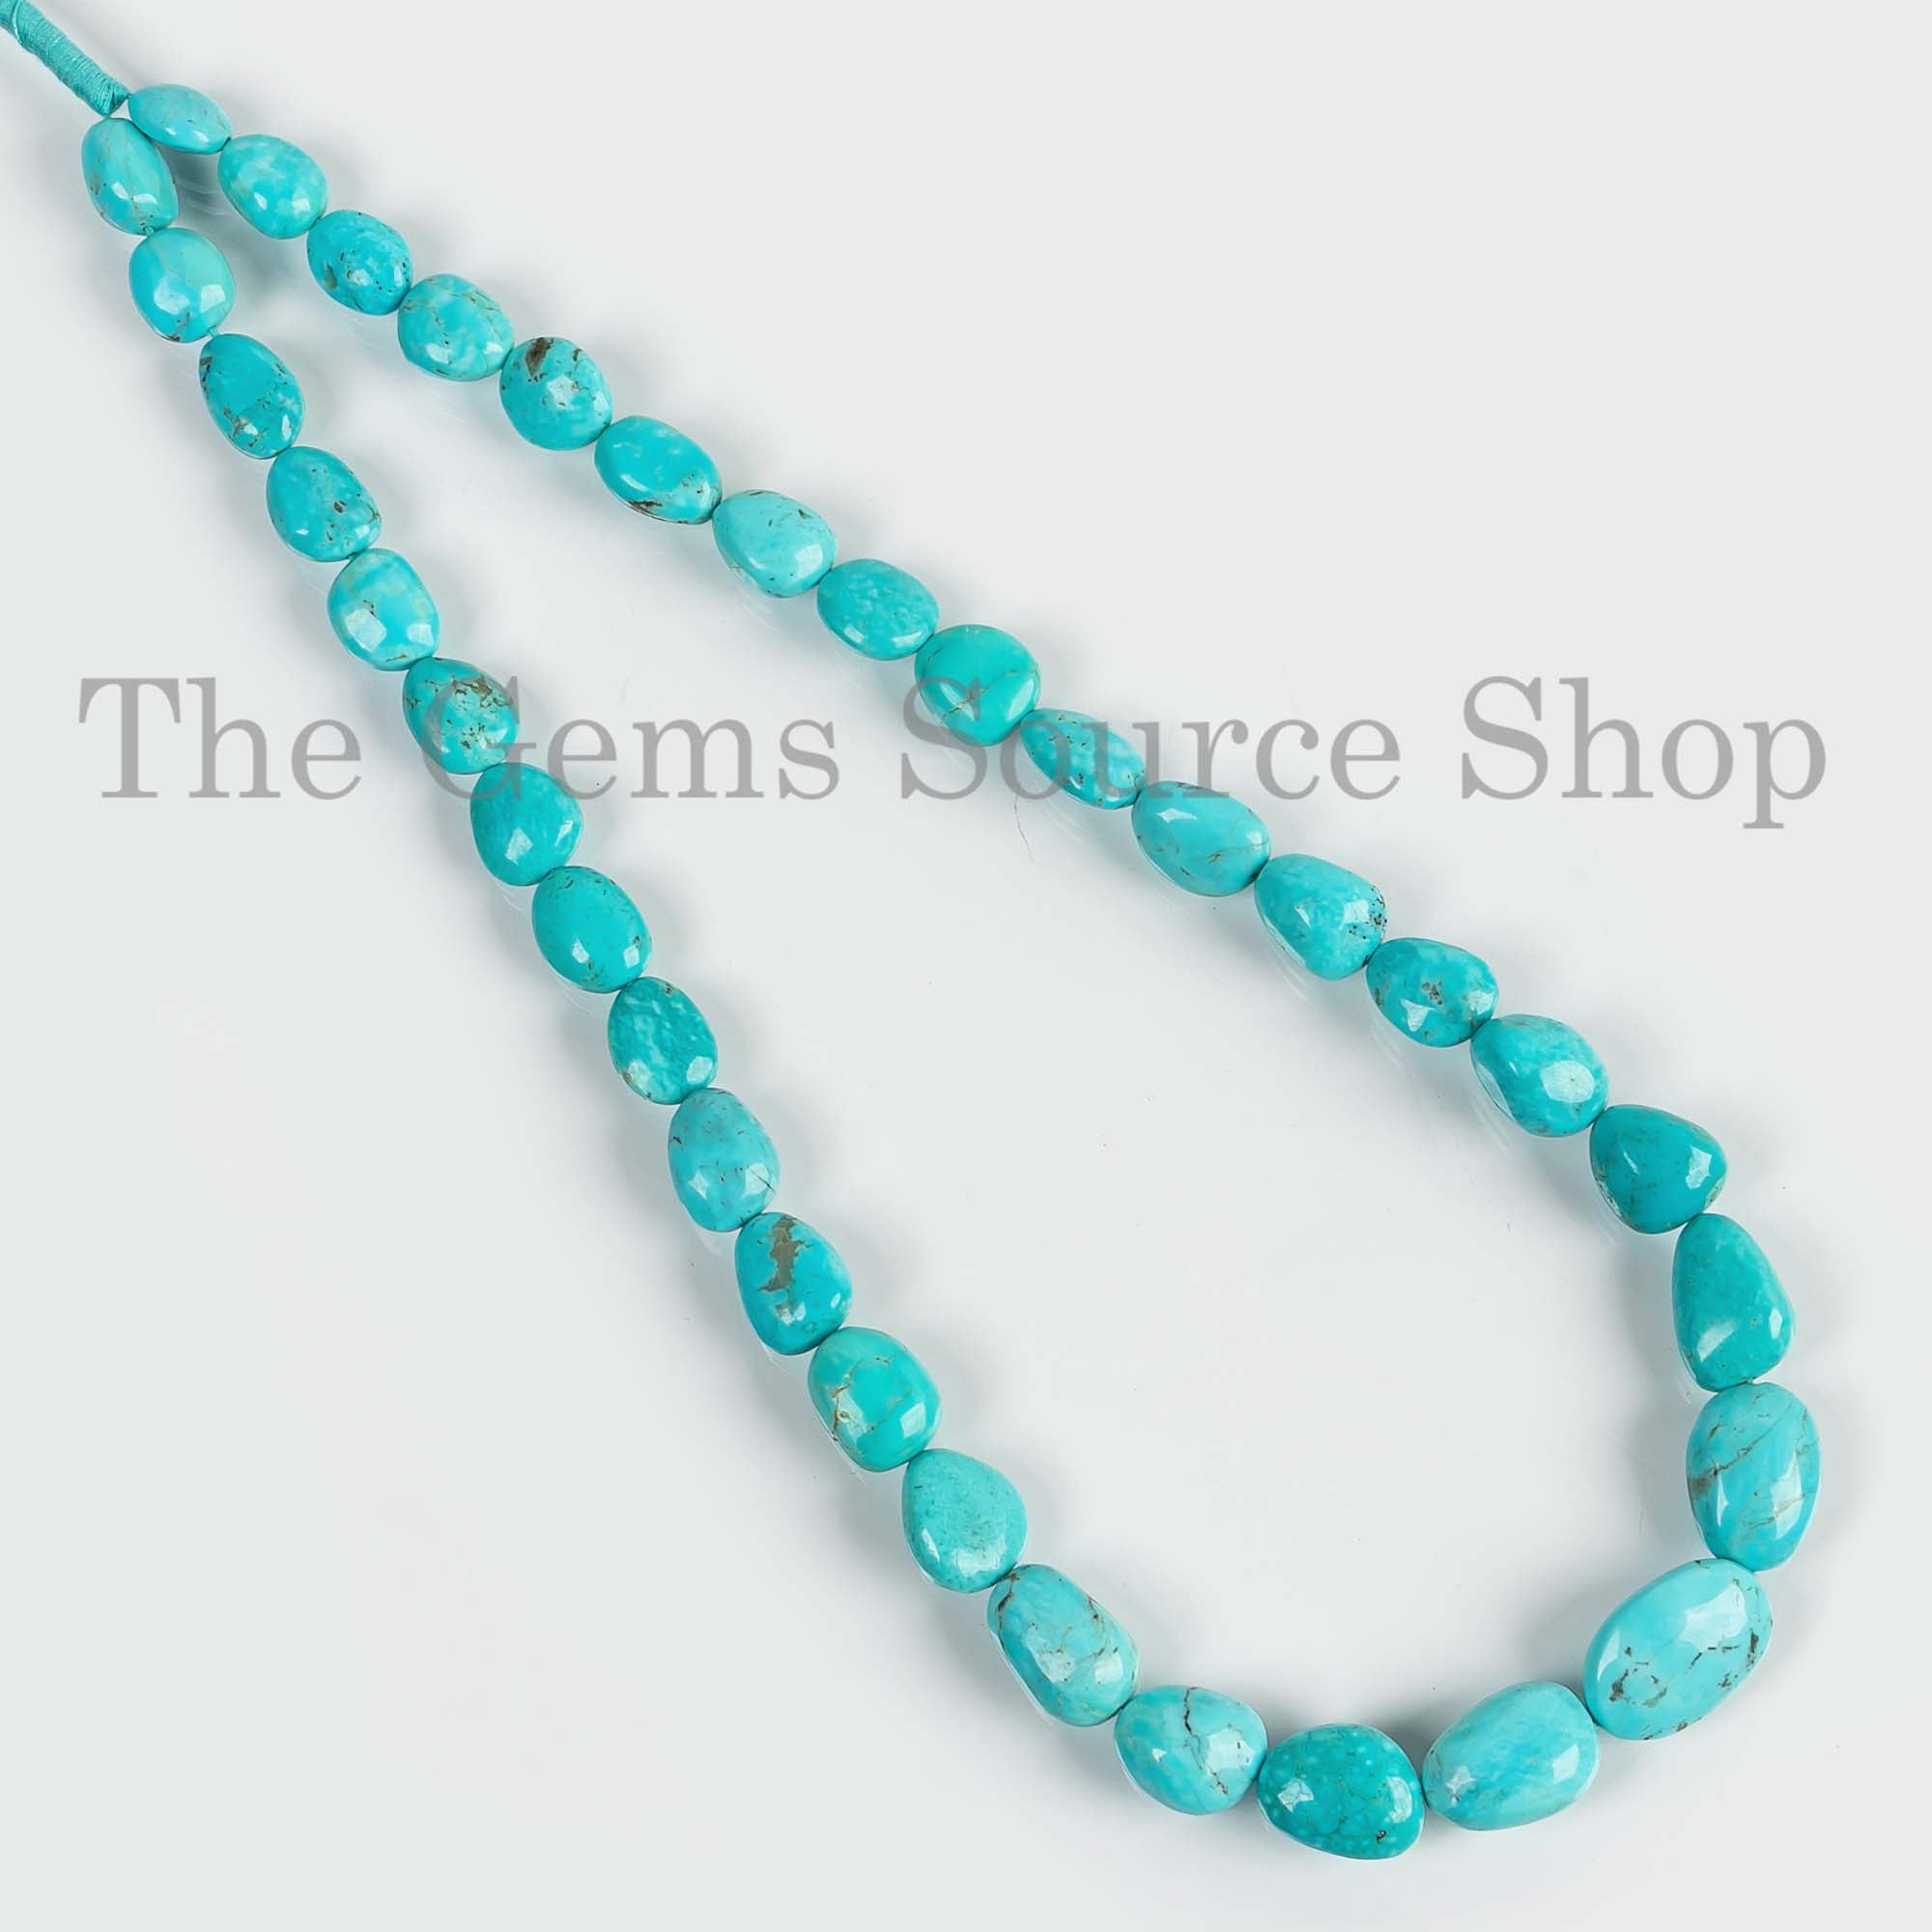 Turquoise Smooth Nuggets, Loose Turquoise Fancy Beads, Turquoise Tumbles For Jewelry